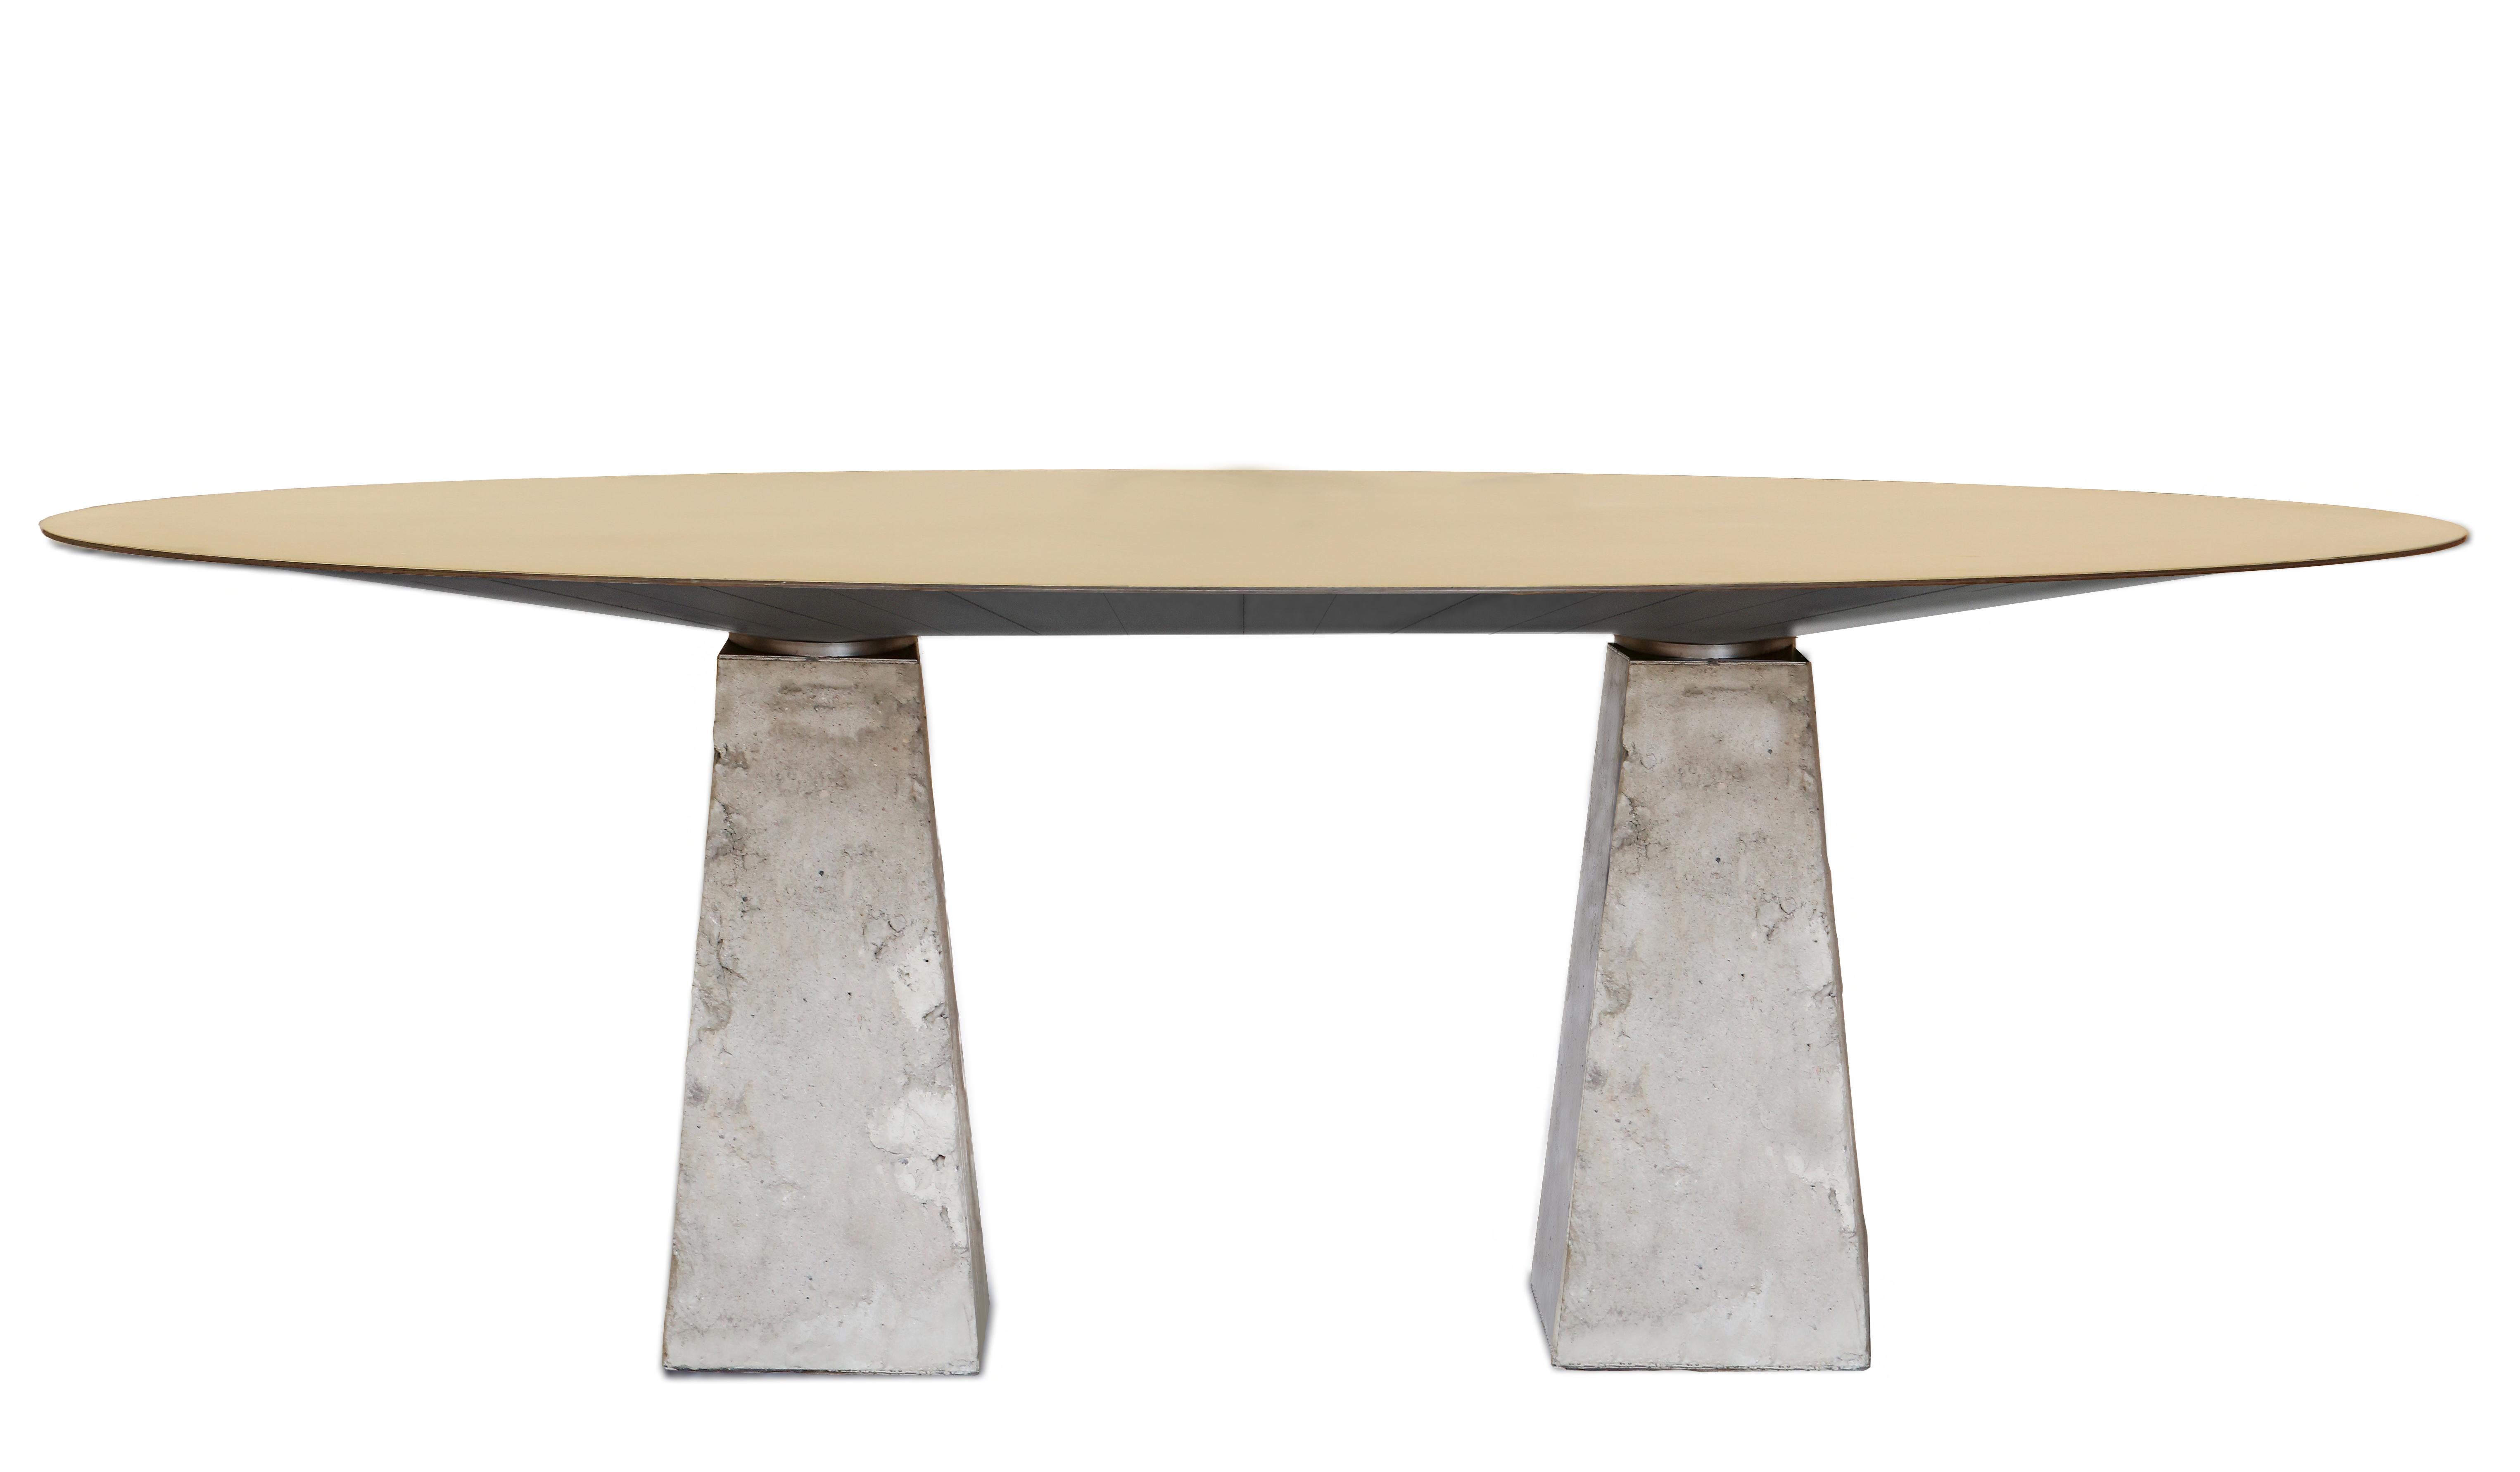 CBS_2 table by Jan Garncarek
Limited Edition of 2
Dimensions: D 100 x W 200 x H 73 cm
Material: Brass, concrete, steel.
Weight: 320 kg

The table is made out from unique elements. This piece has the concrete base - a vintage pedestal which is around